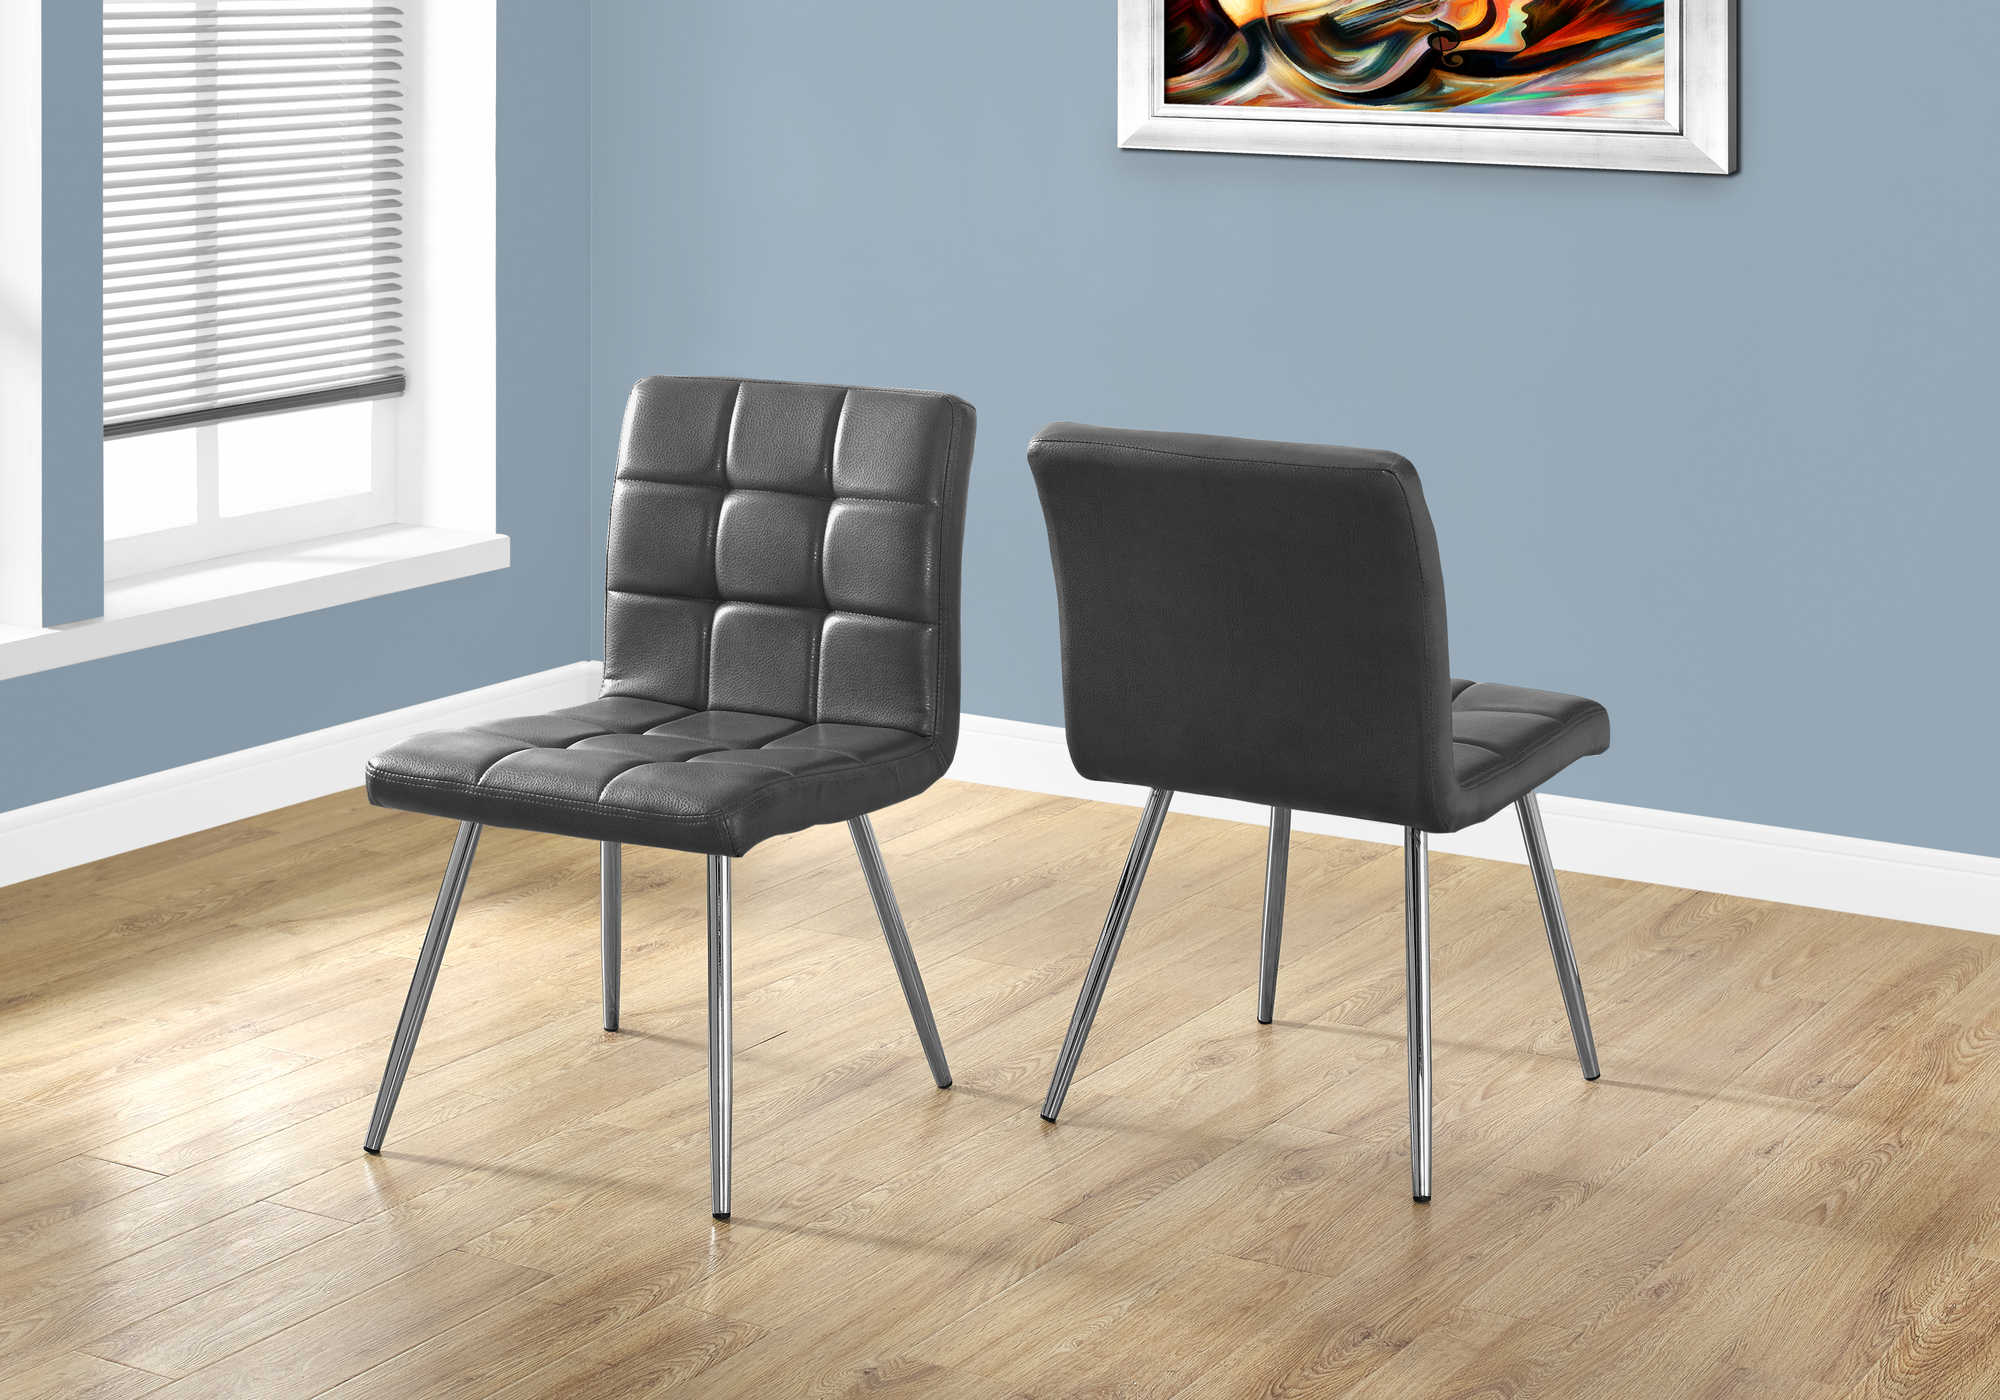 DINING CHAIR - 2PCS / 32"H / GREY LEATHER-LOOK / CHROME 